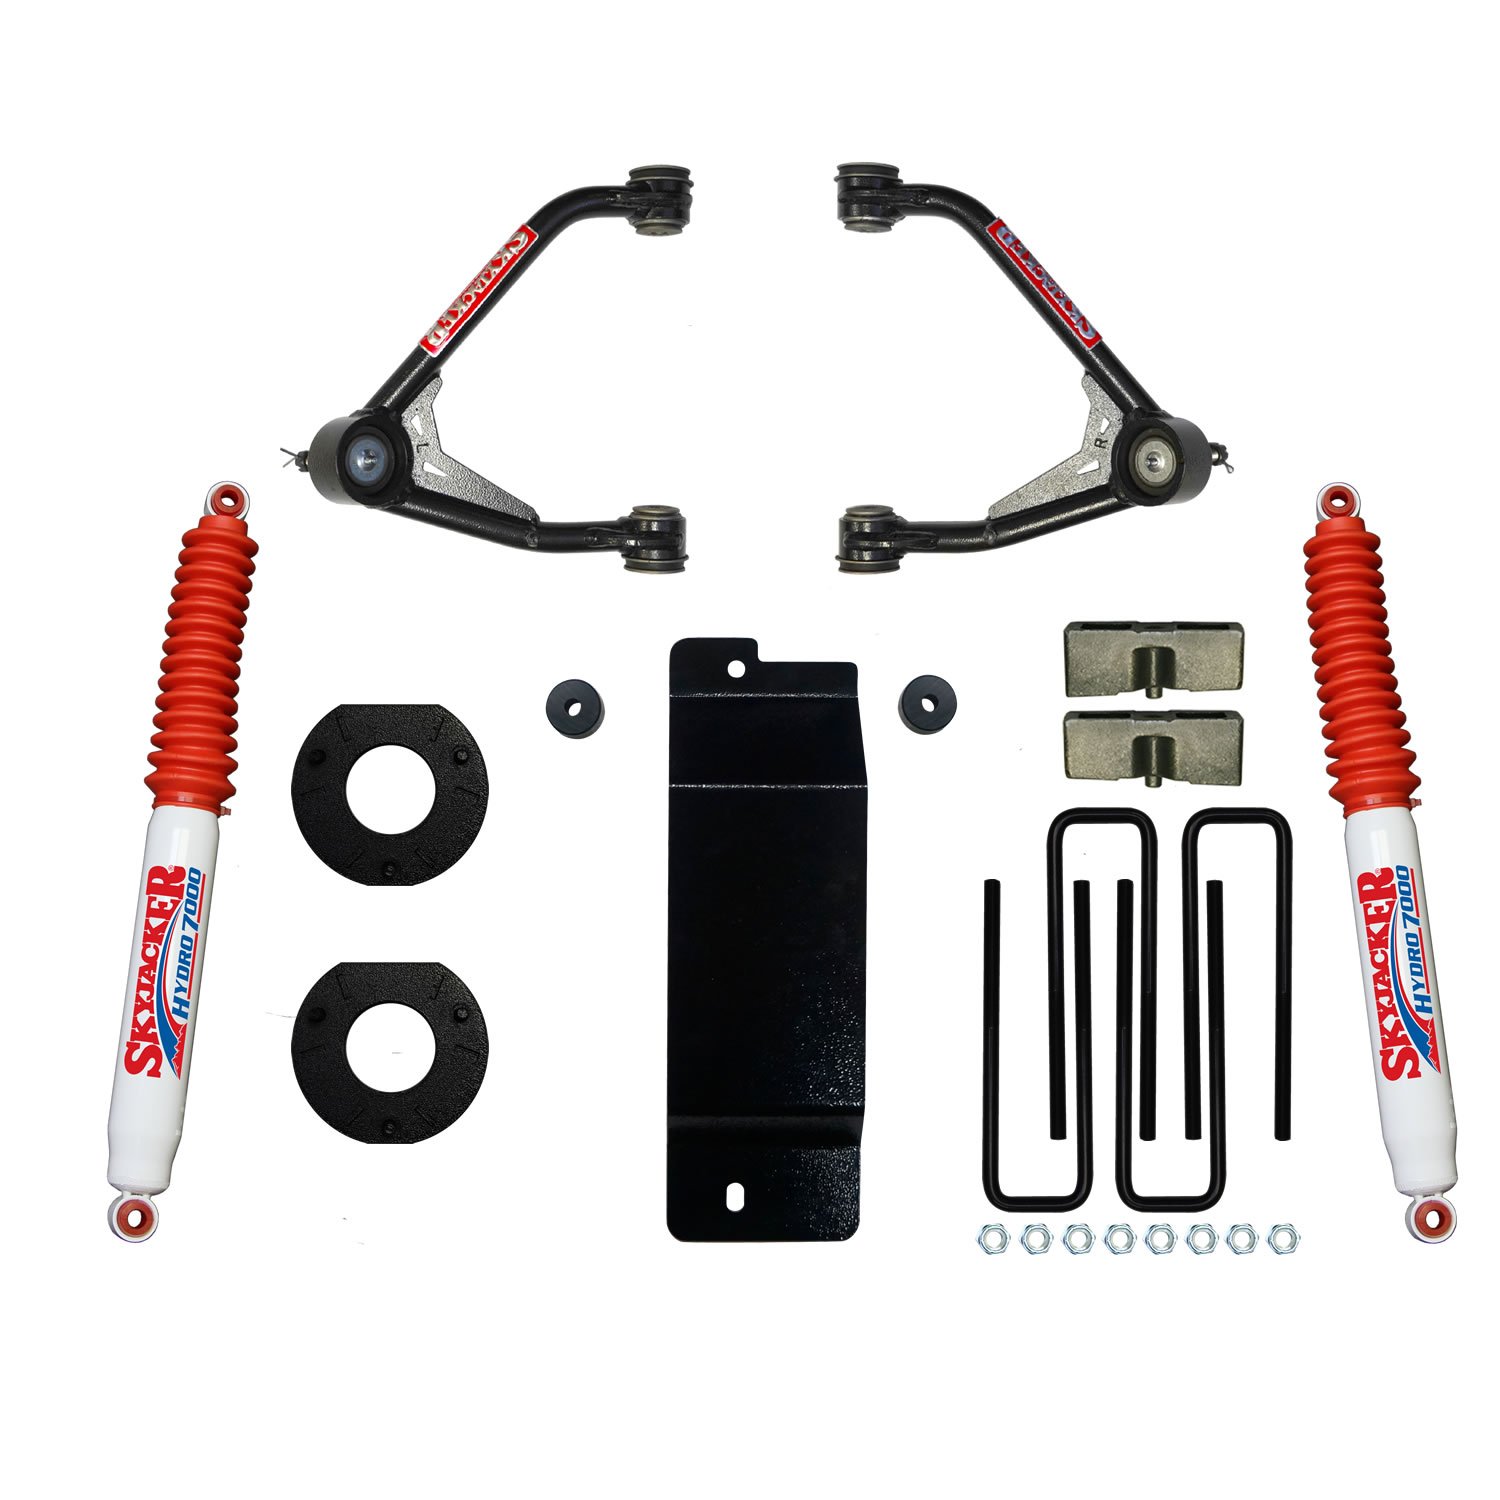 3.500-4.000 In. Upper Control Arm Lift Kit with Hydro7000 Rear Shocks for 2014-2016 GM 1500 4WD